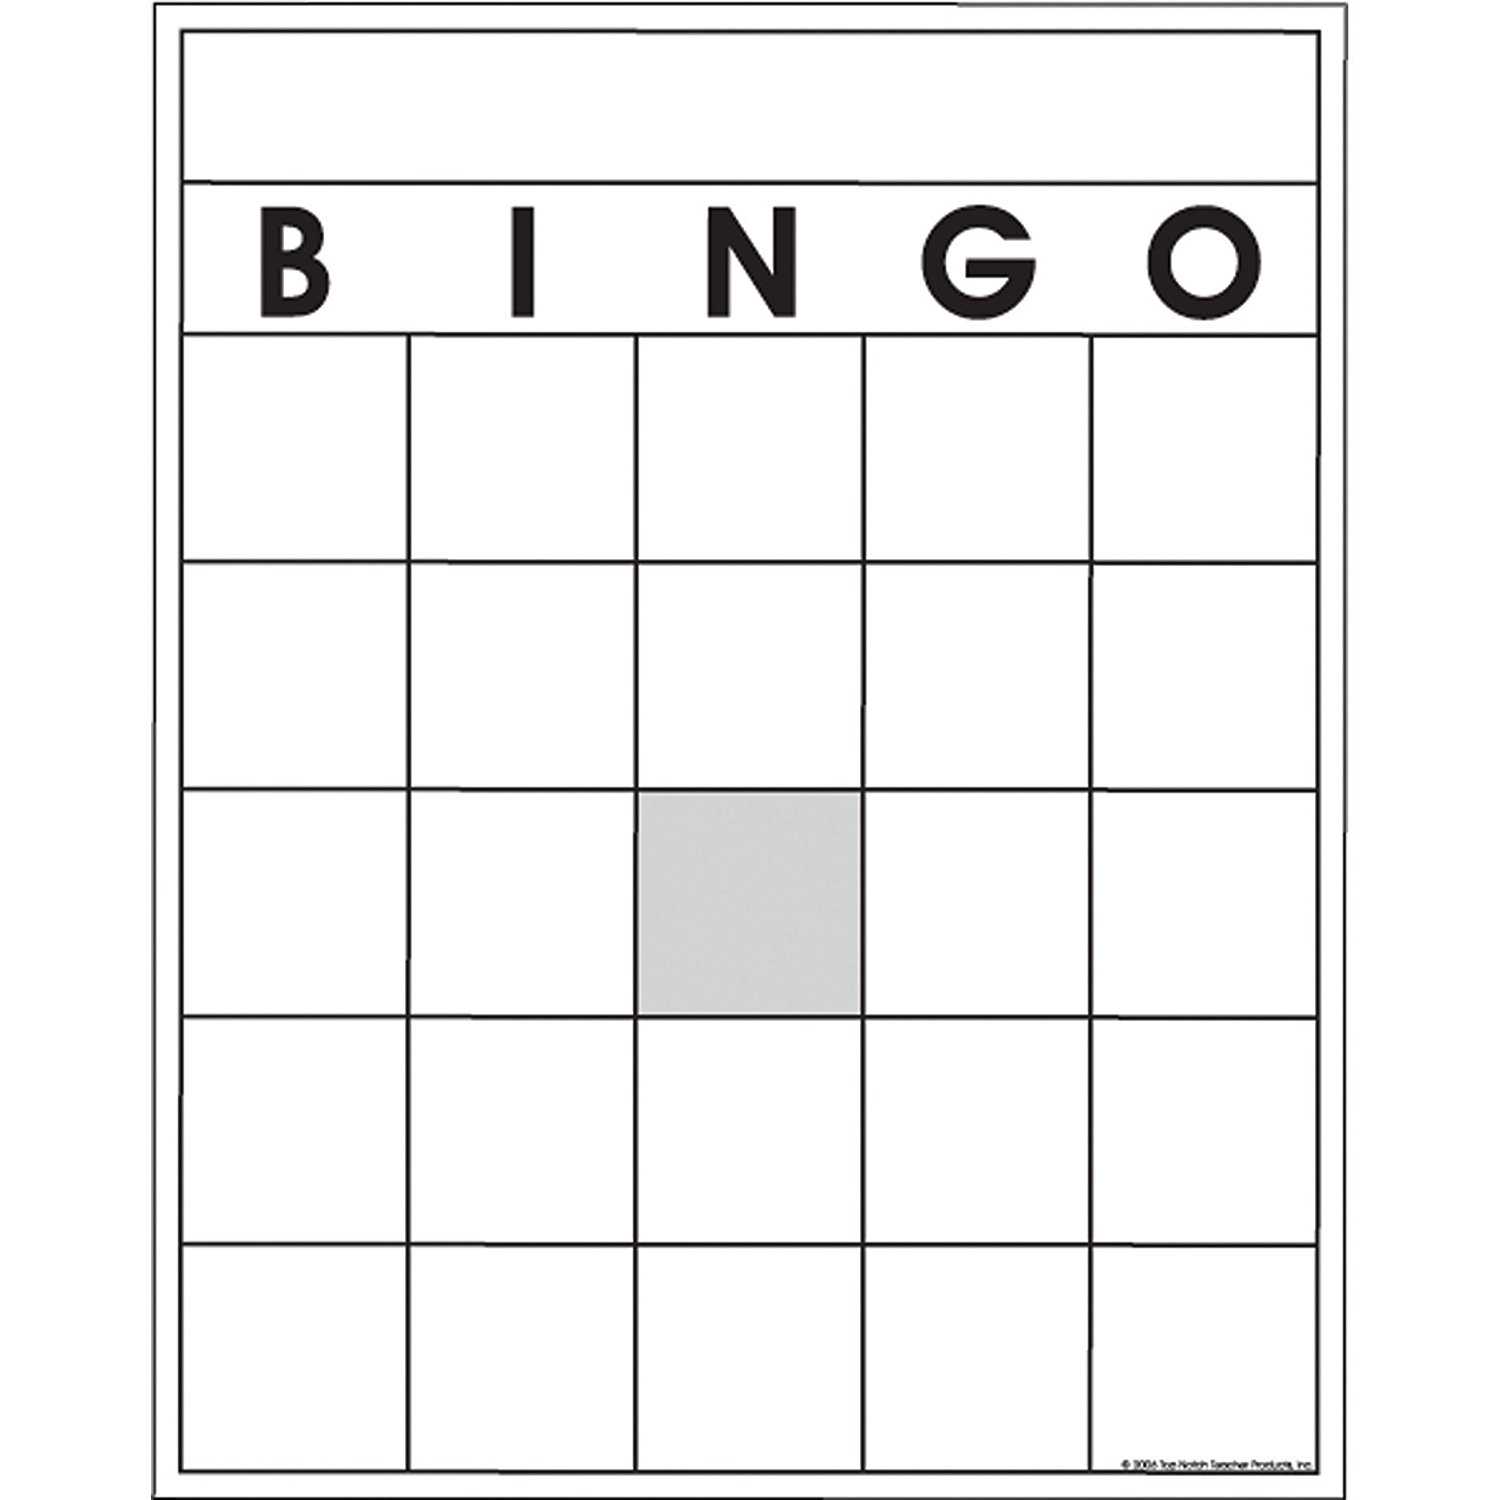 How To Create A Bingo Board Using Excel / Make Bingo Game In Excel ...